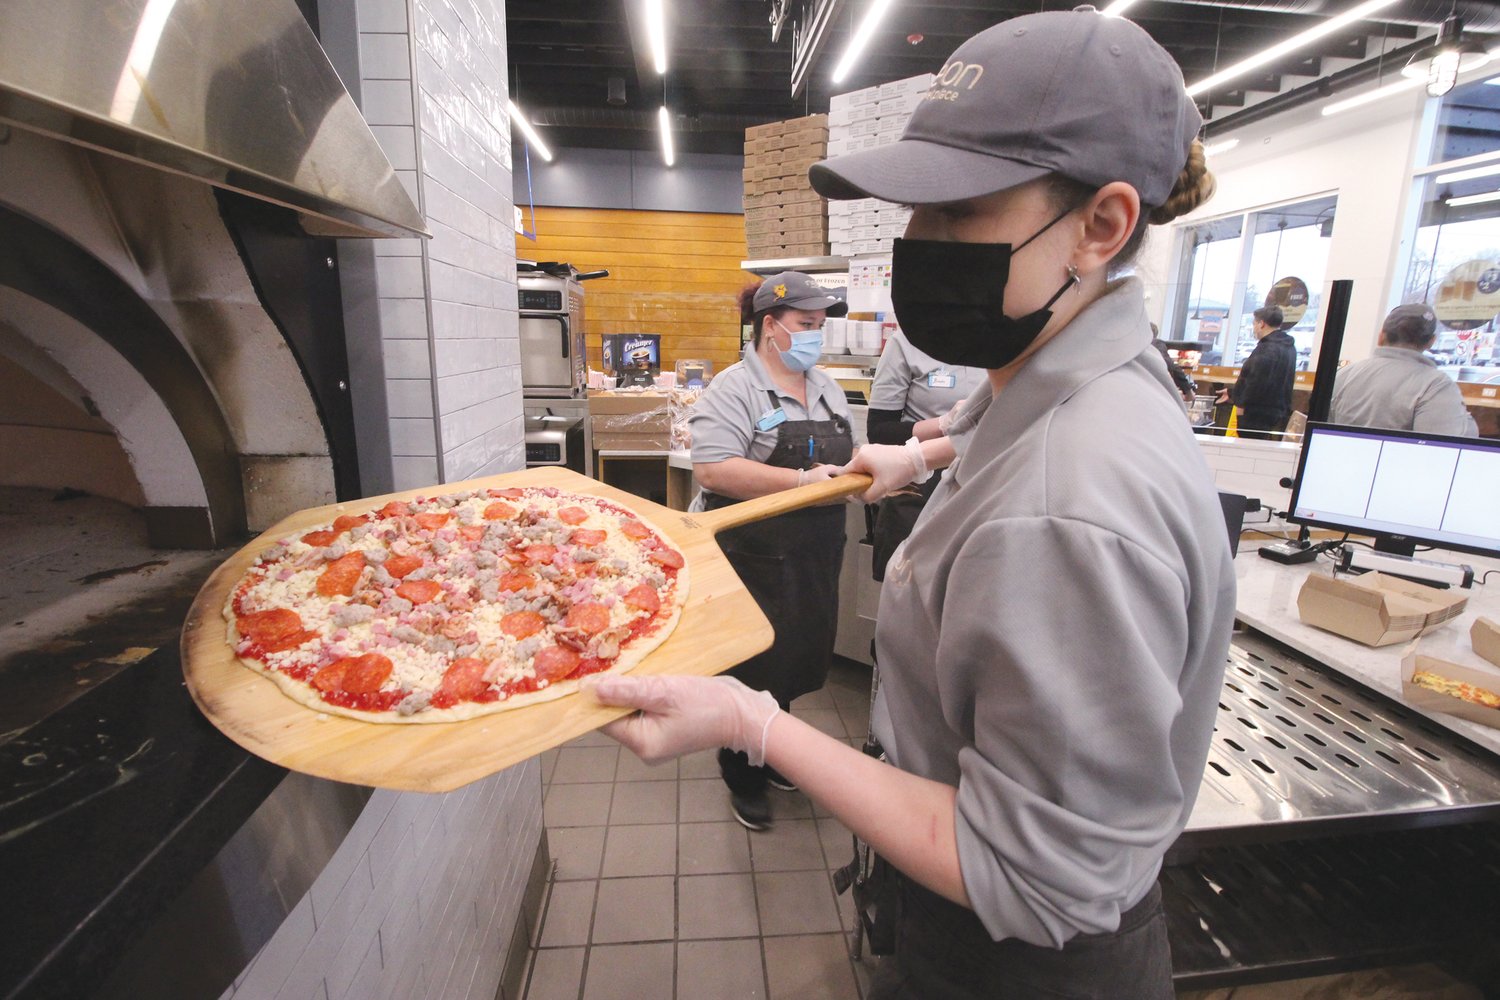 PIZZA PIE: Elsie Babie puts the finishing touches on a freshly-made pizza at Neon.